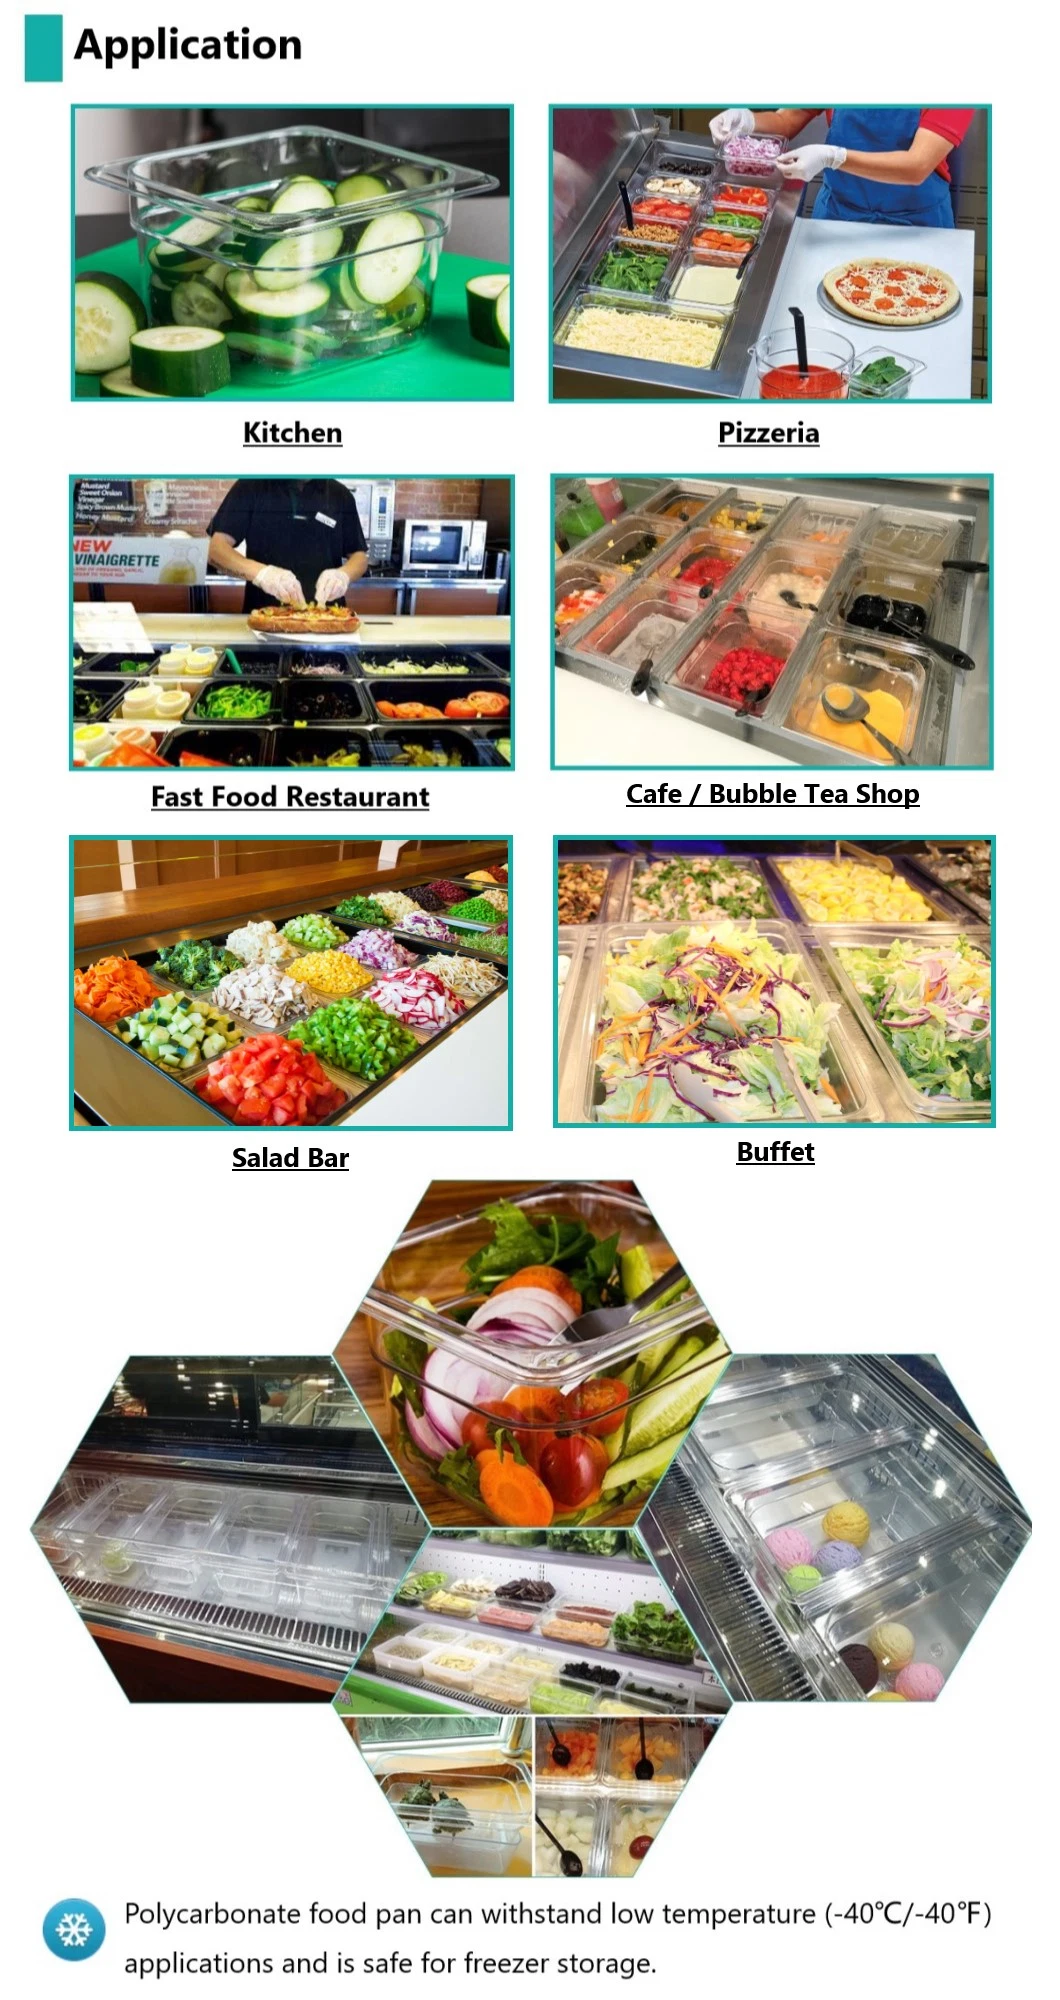 1/1 Full Size 2.5" Deep Polycarbonate Cold Food Storage Container Plastic Gn Pan for Catering